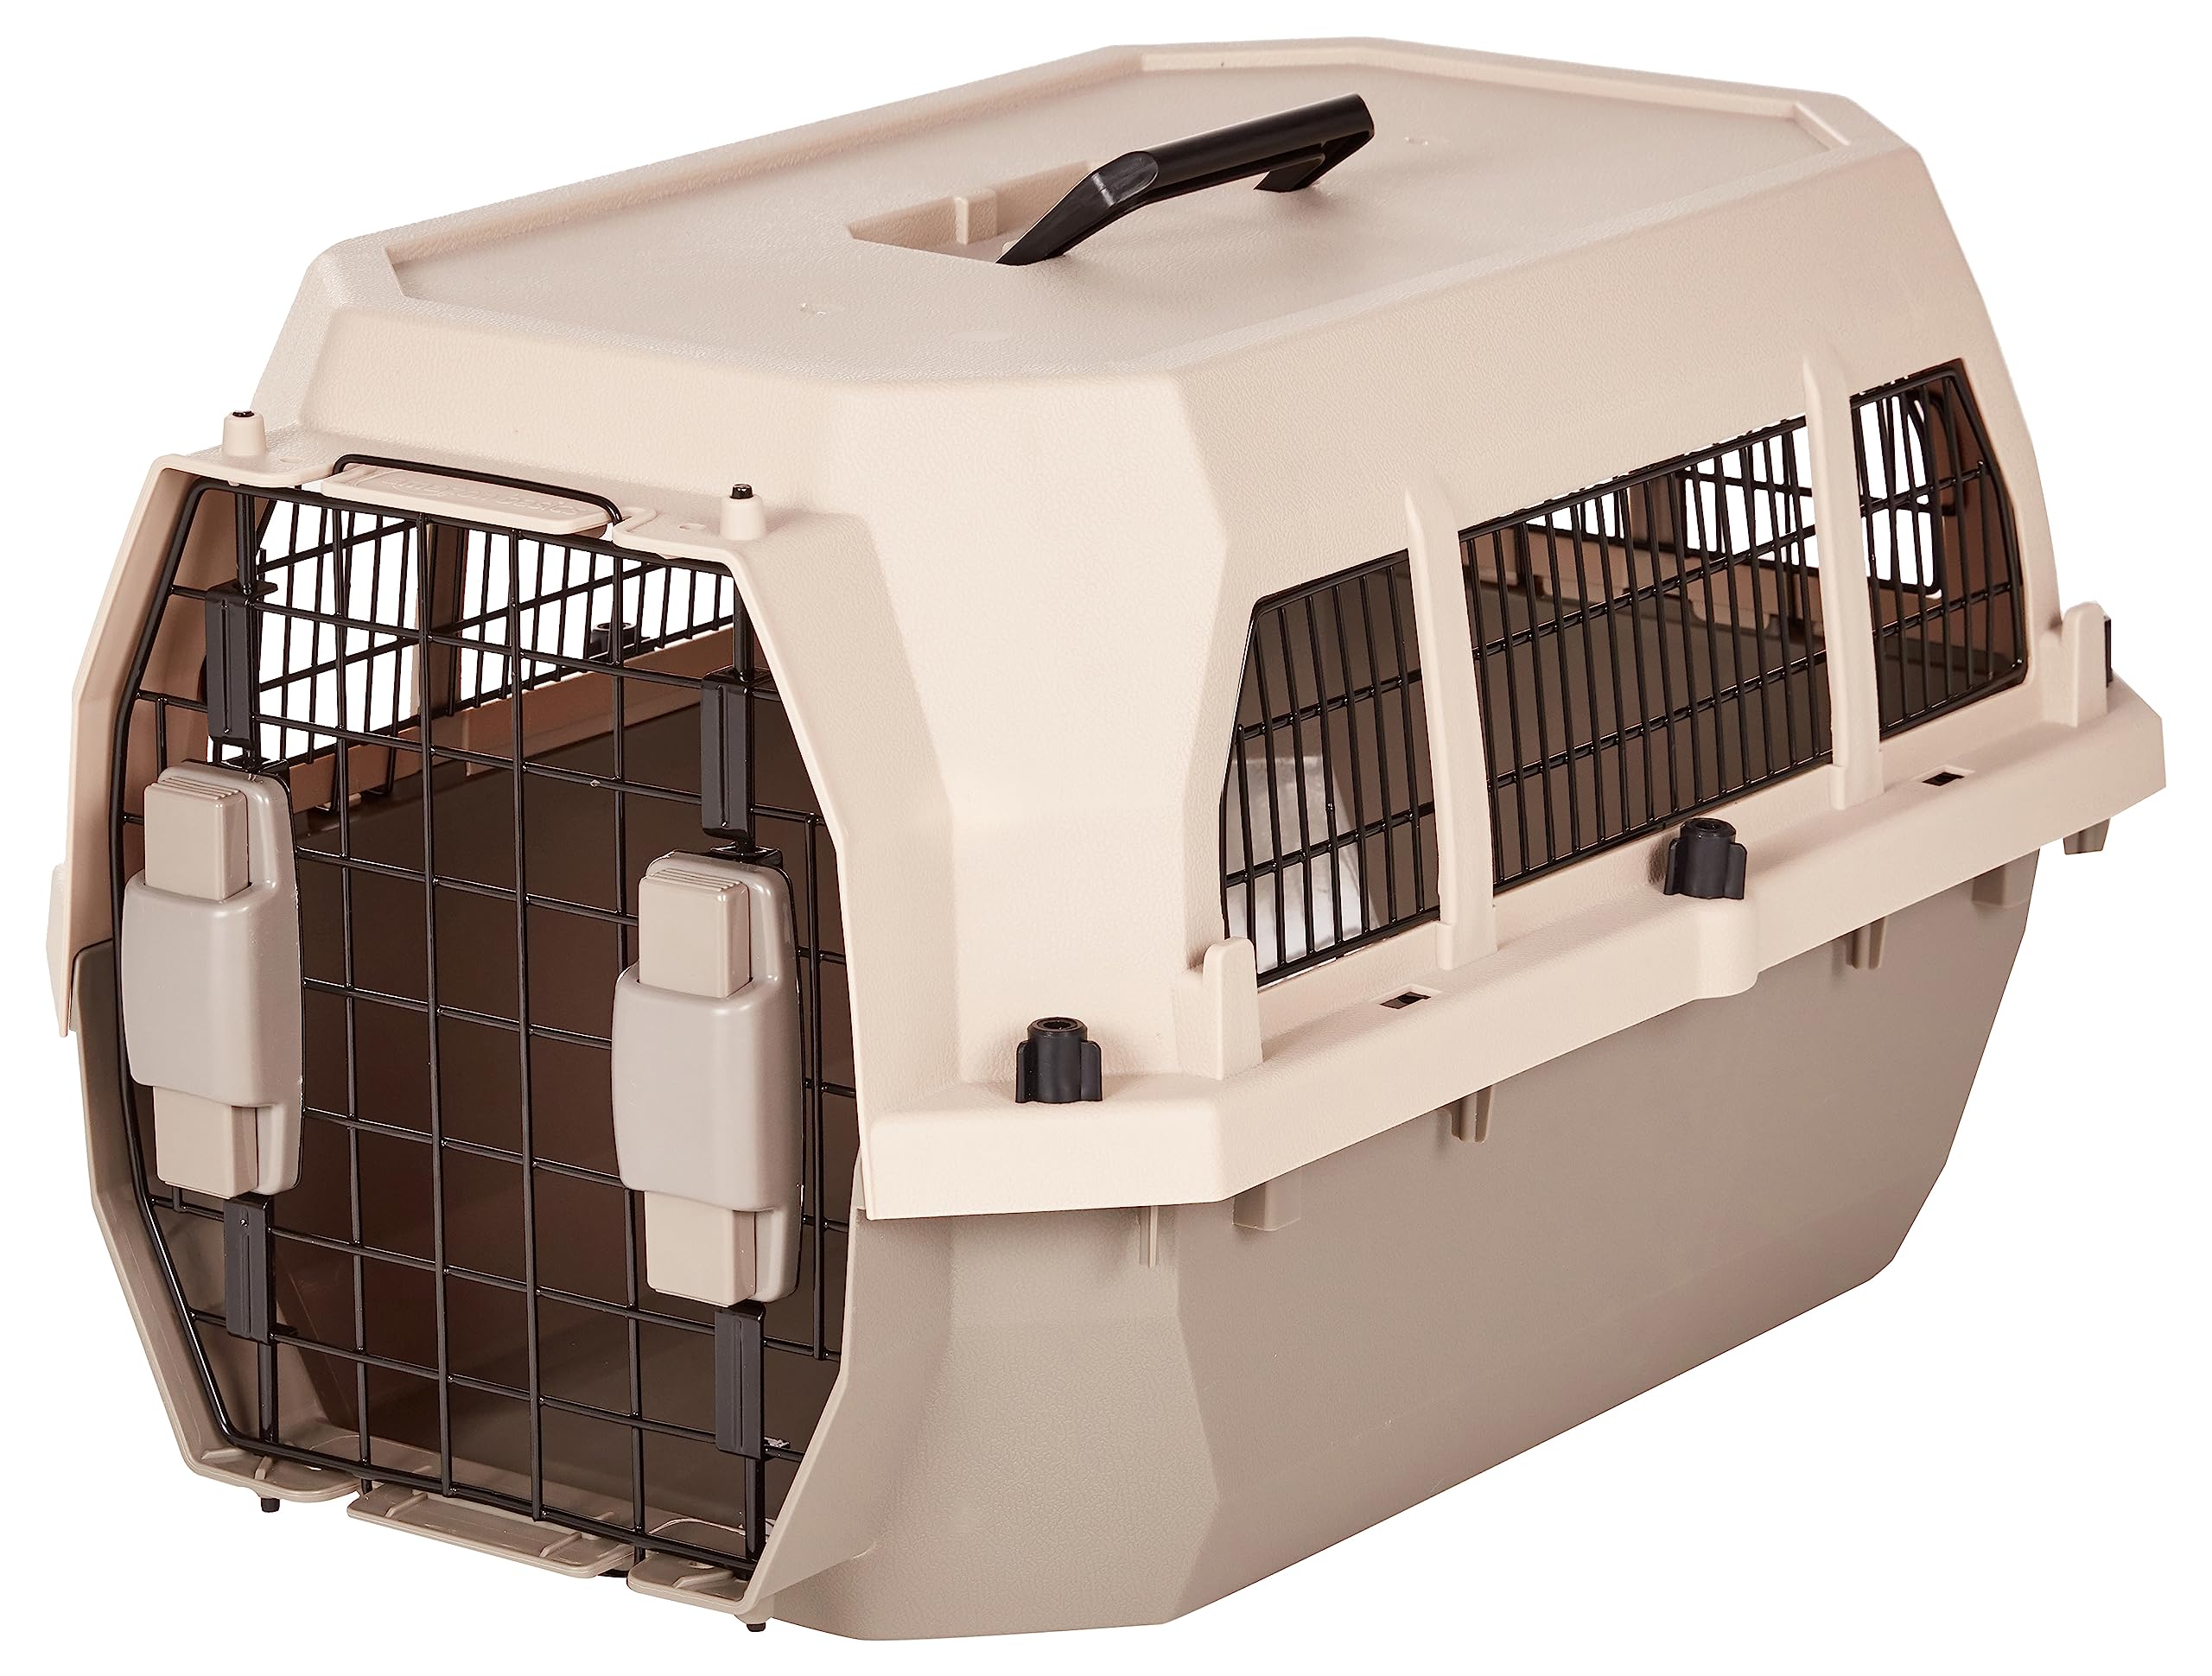 23" Amazon Basics Pet Carrier Kennel w/ Metal Wire Ventilation $24.32 + Free Shipping w/ Prime or on $35+